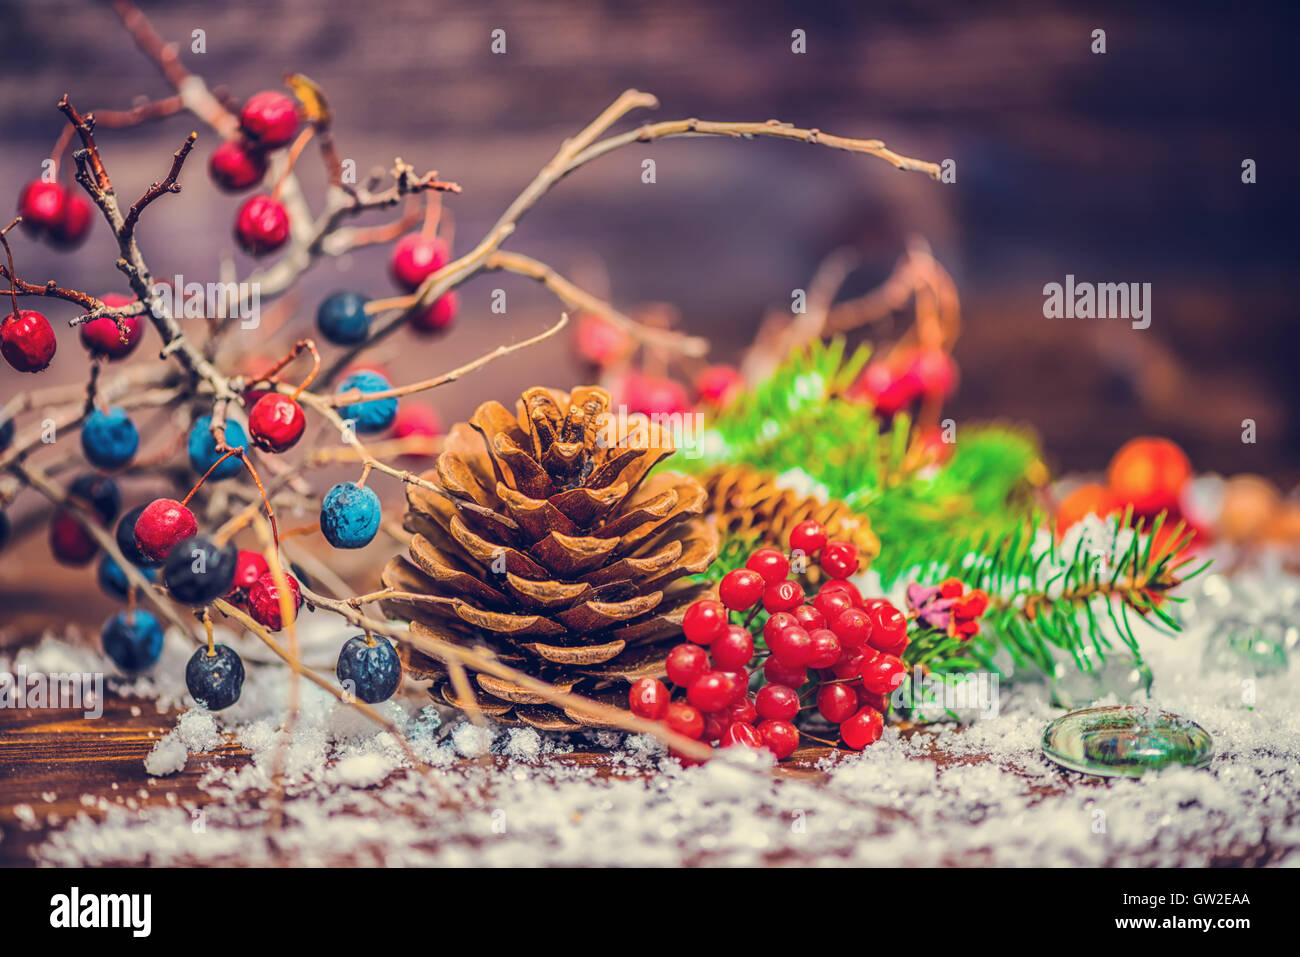 Thanksgiving holiday greeting card with autumn fruit, apple, nuts, cones, berries, fir tree and snow, toned style, close up Stock Photo